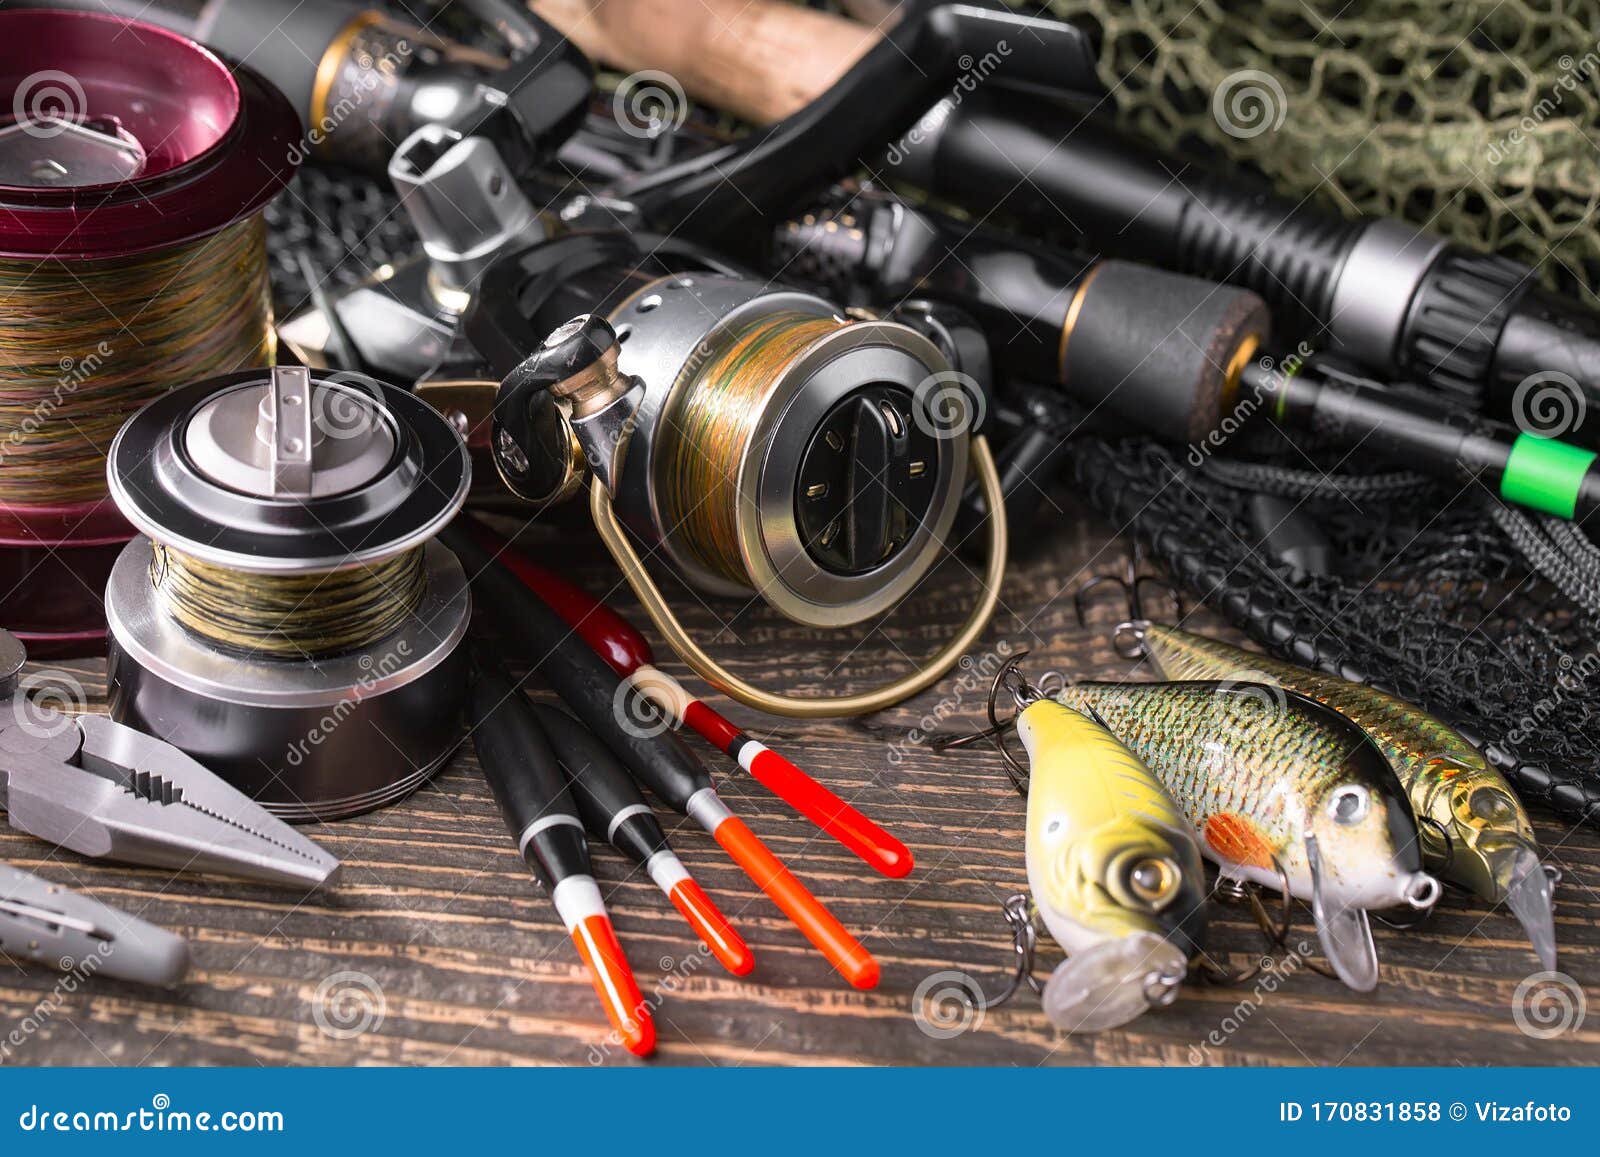 https://thumbs.dreamstime.com/z/fishing-tackle-wooden-table-fishing-rods-spinnings-composition-accessories-fishing-old-background-170831858.jpg